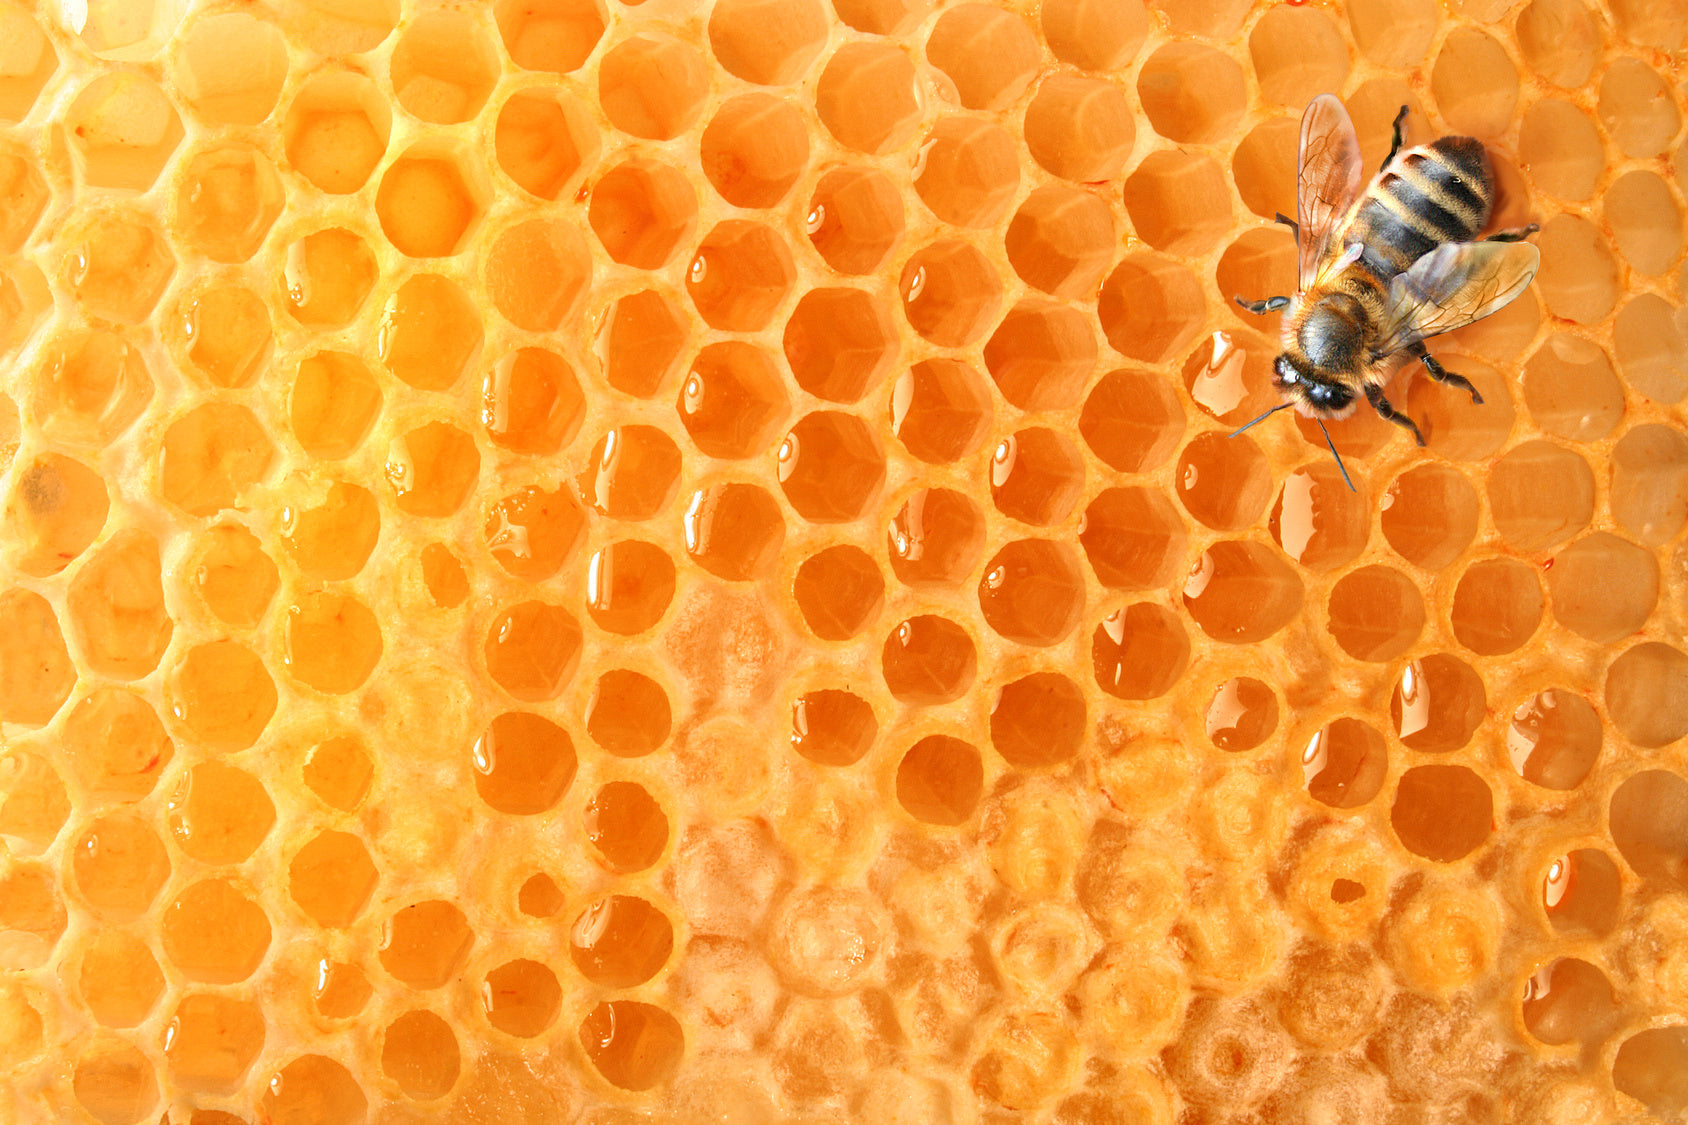 Best-Looking Honey is Packed During Winter